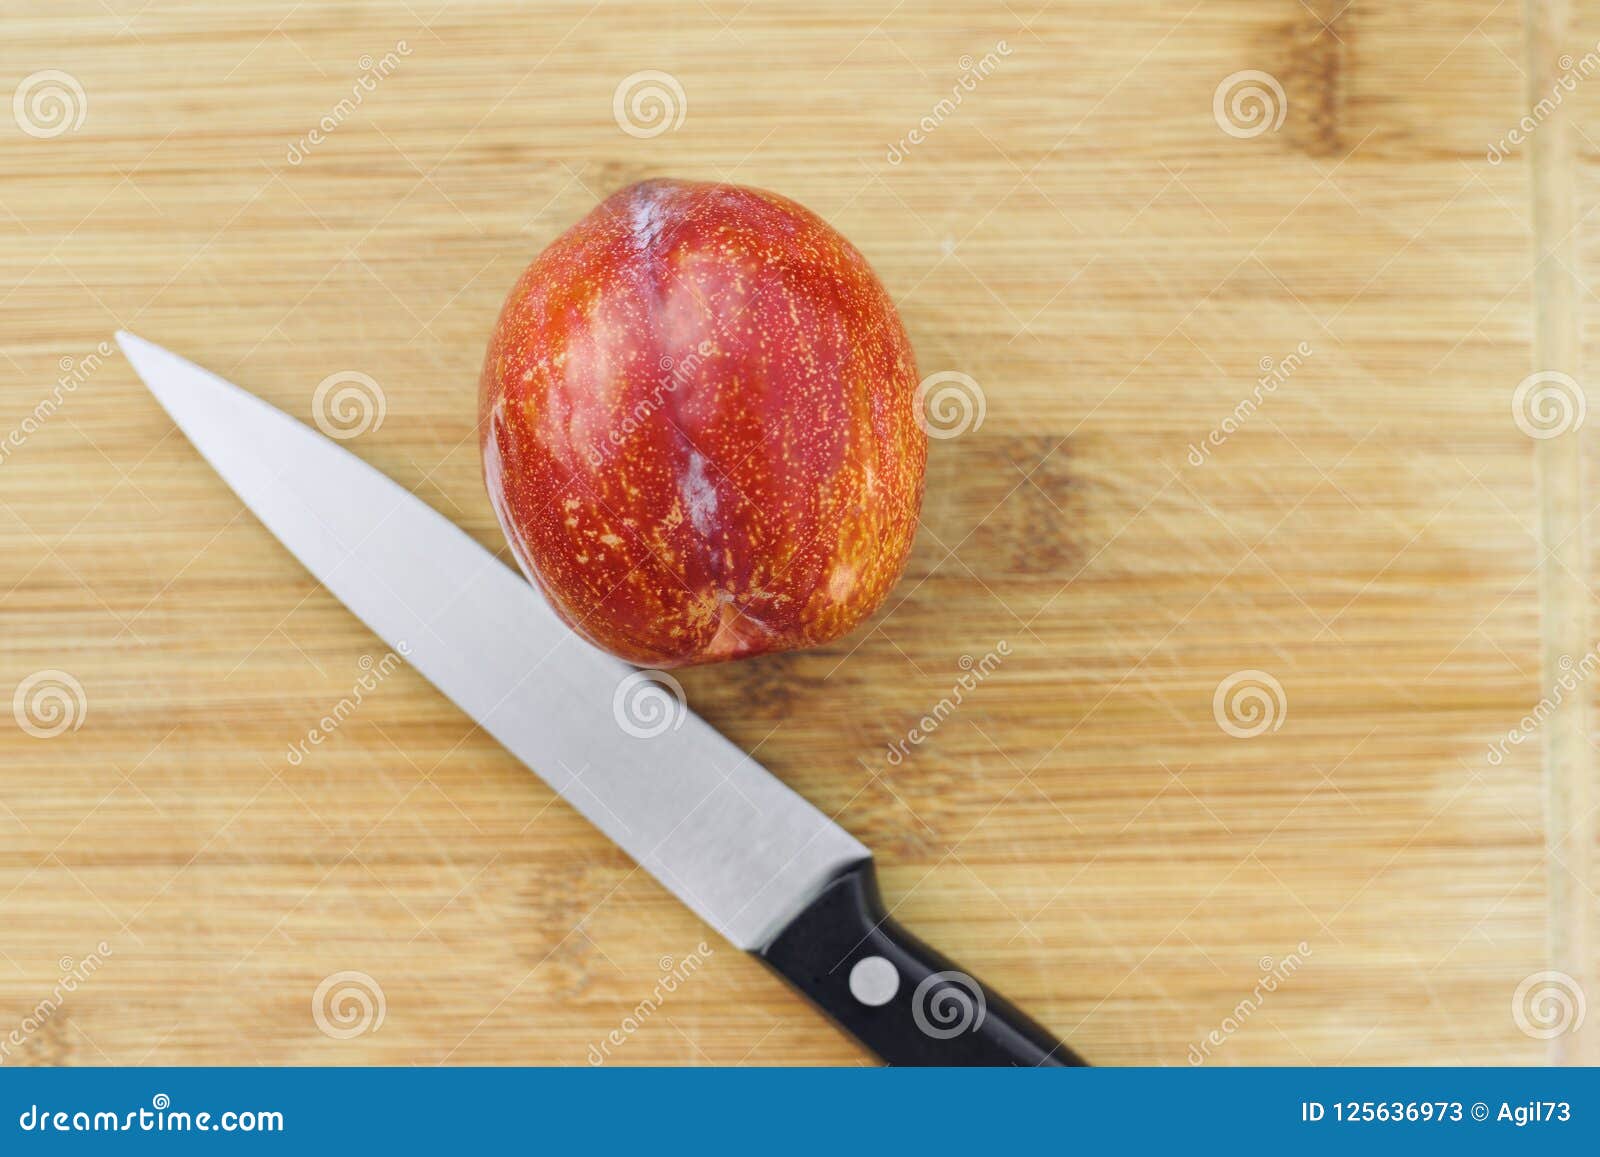 one amigo pluots on a wood chopping board with a knife